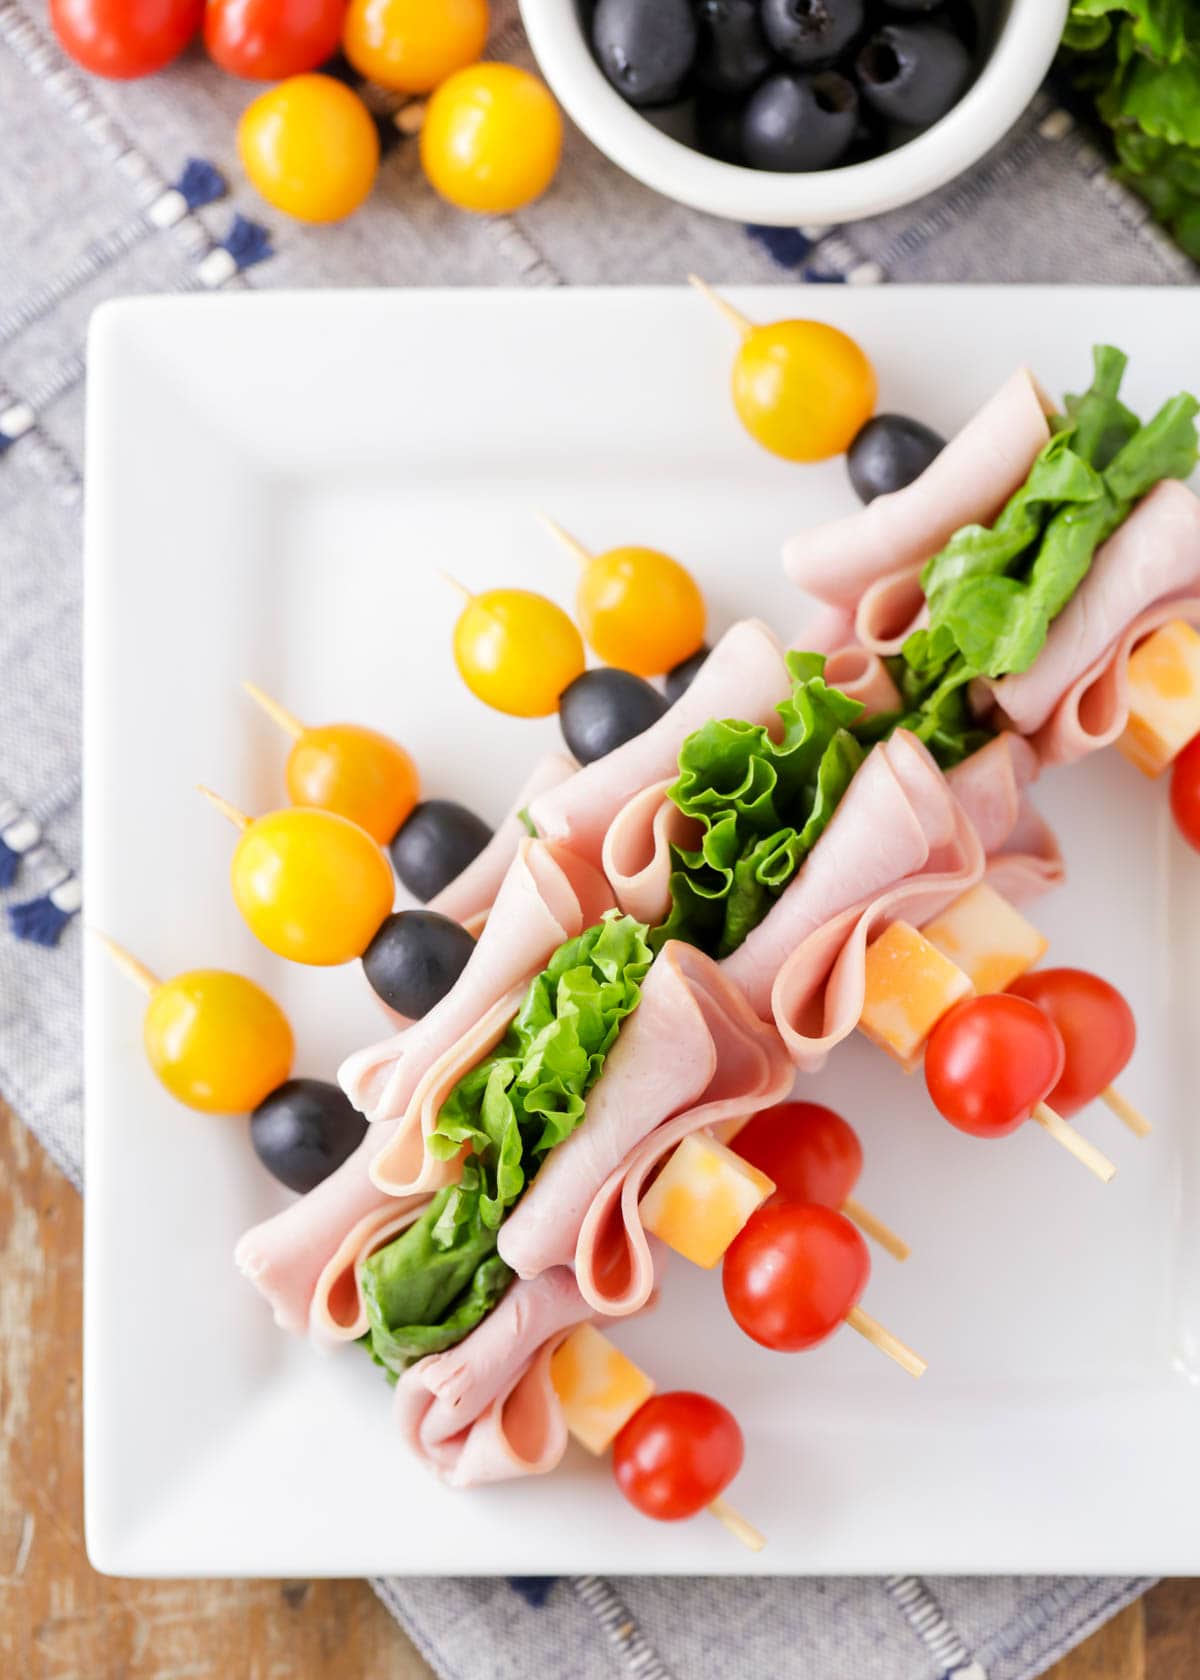 Deli meat kabobs with cheese, tomatoes, olives, and lettuce on a white plate